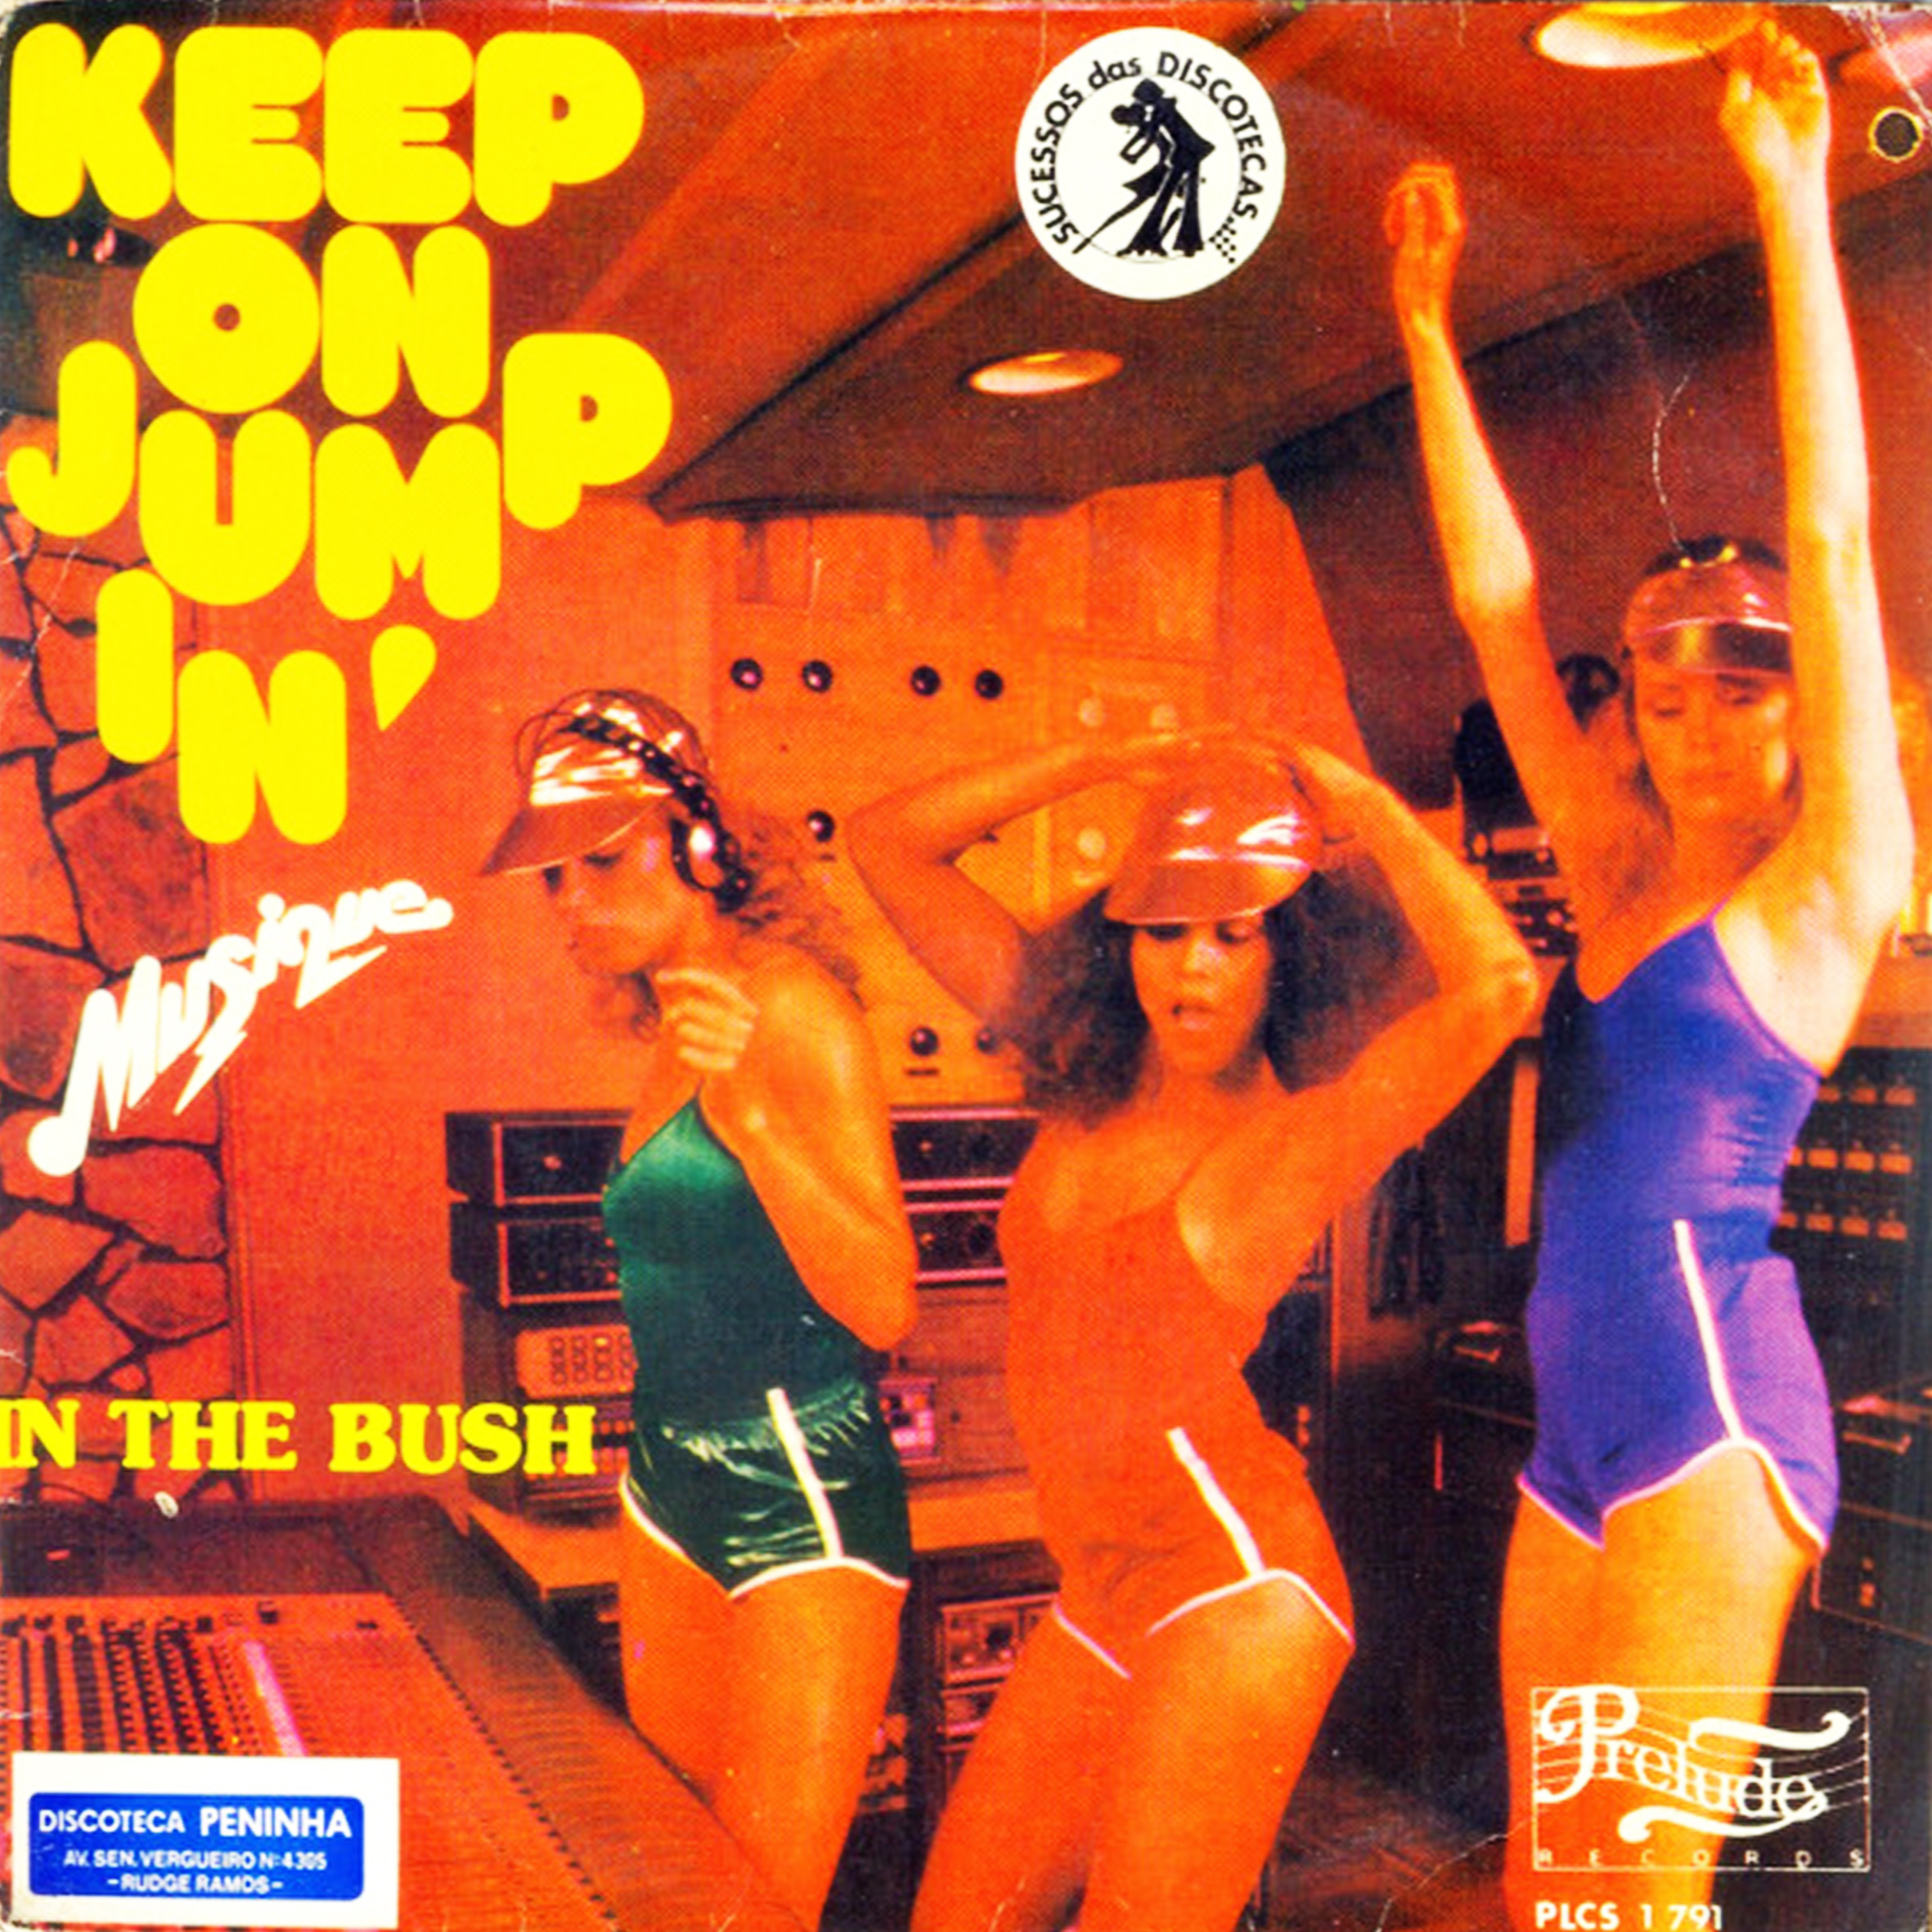 Vinil Compacto - Musique - Keep On Jumpin / In The Bush